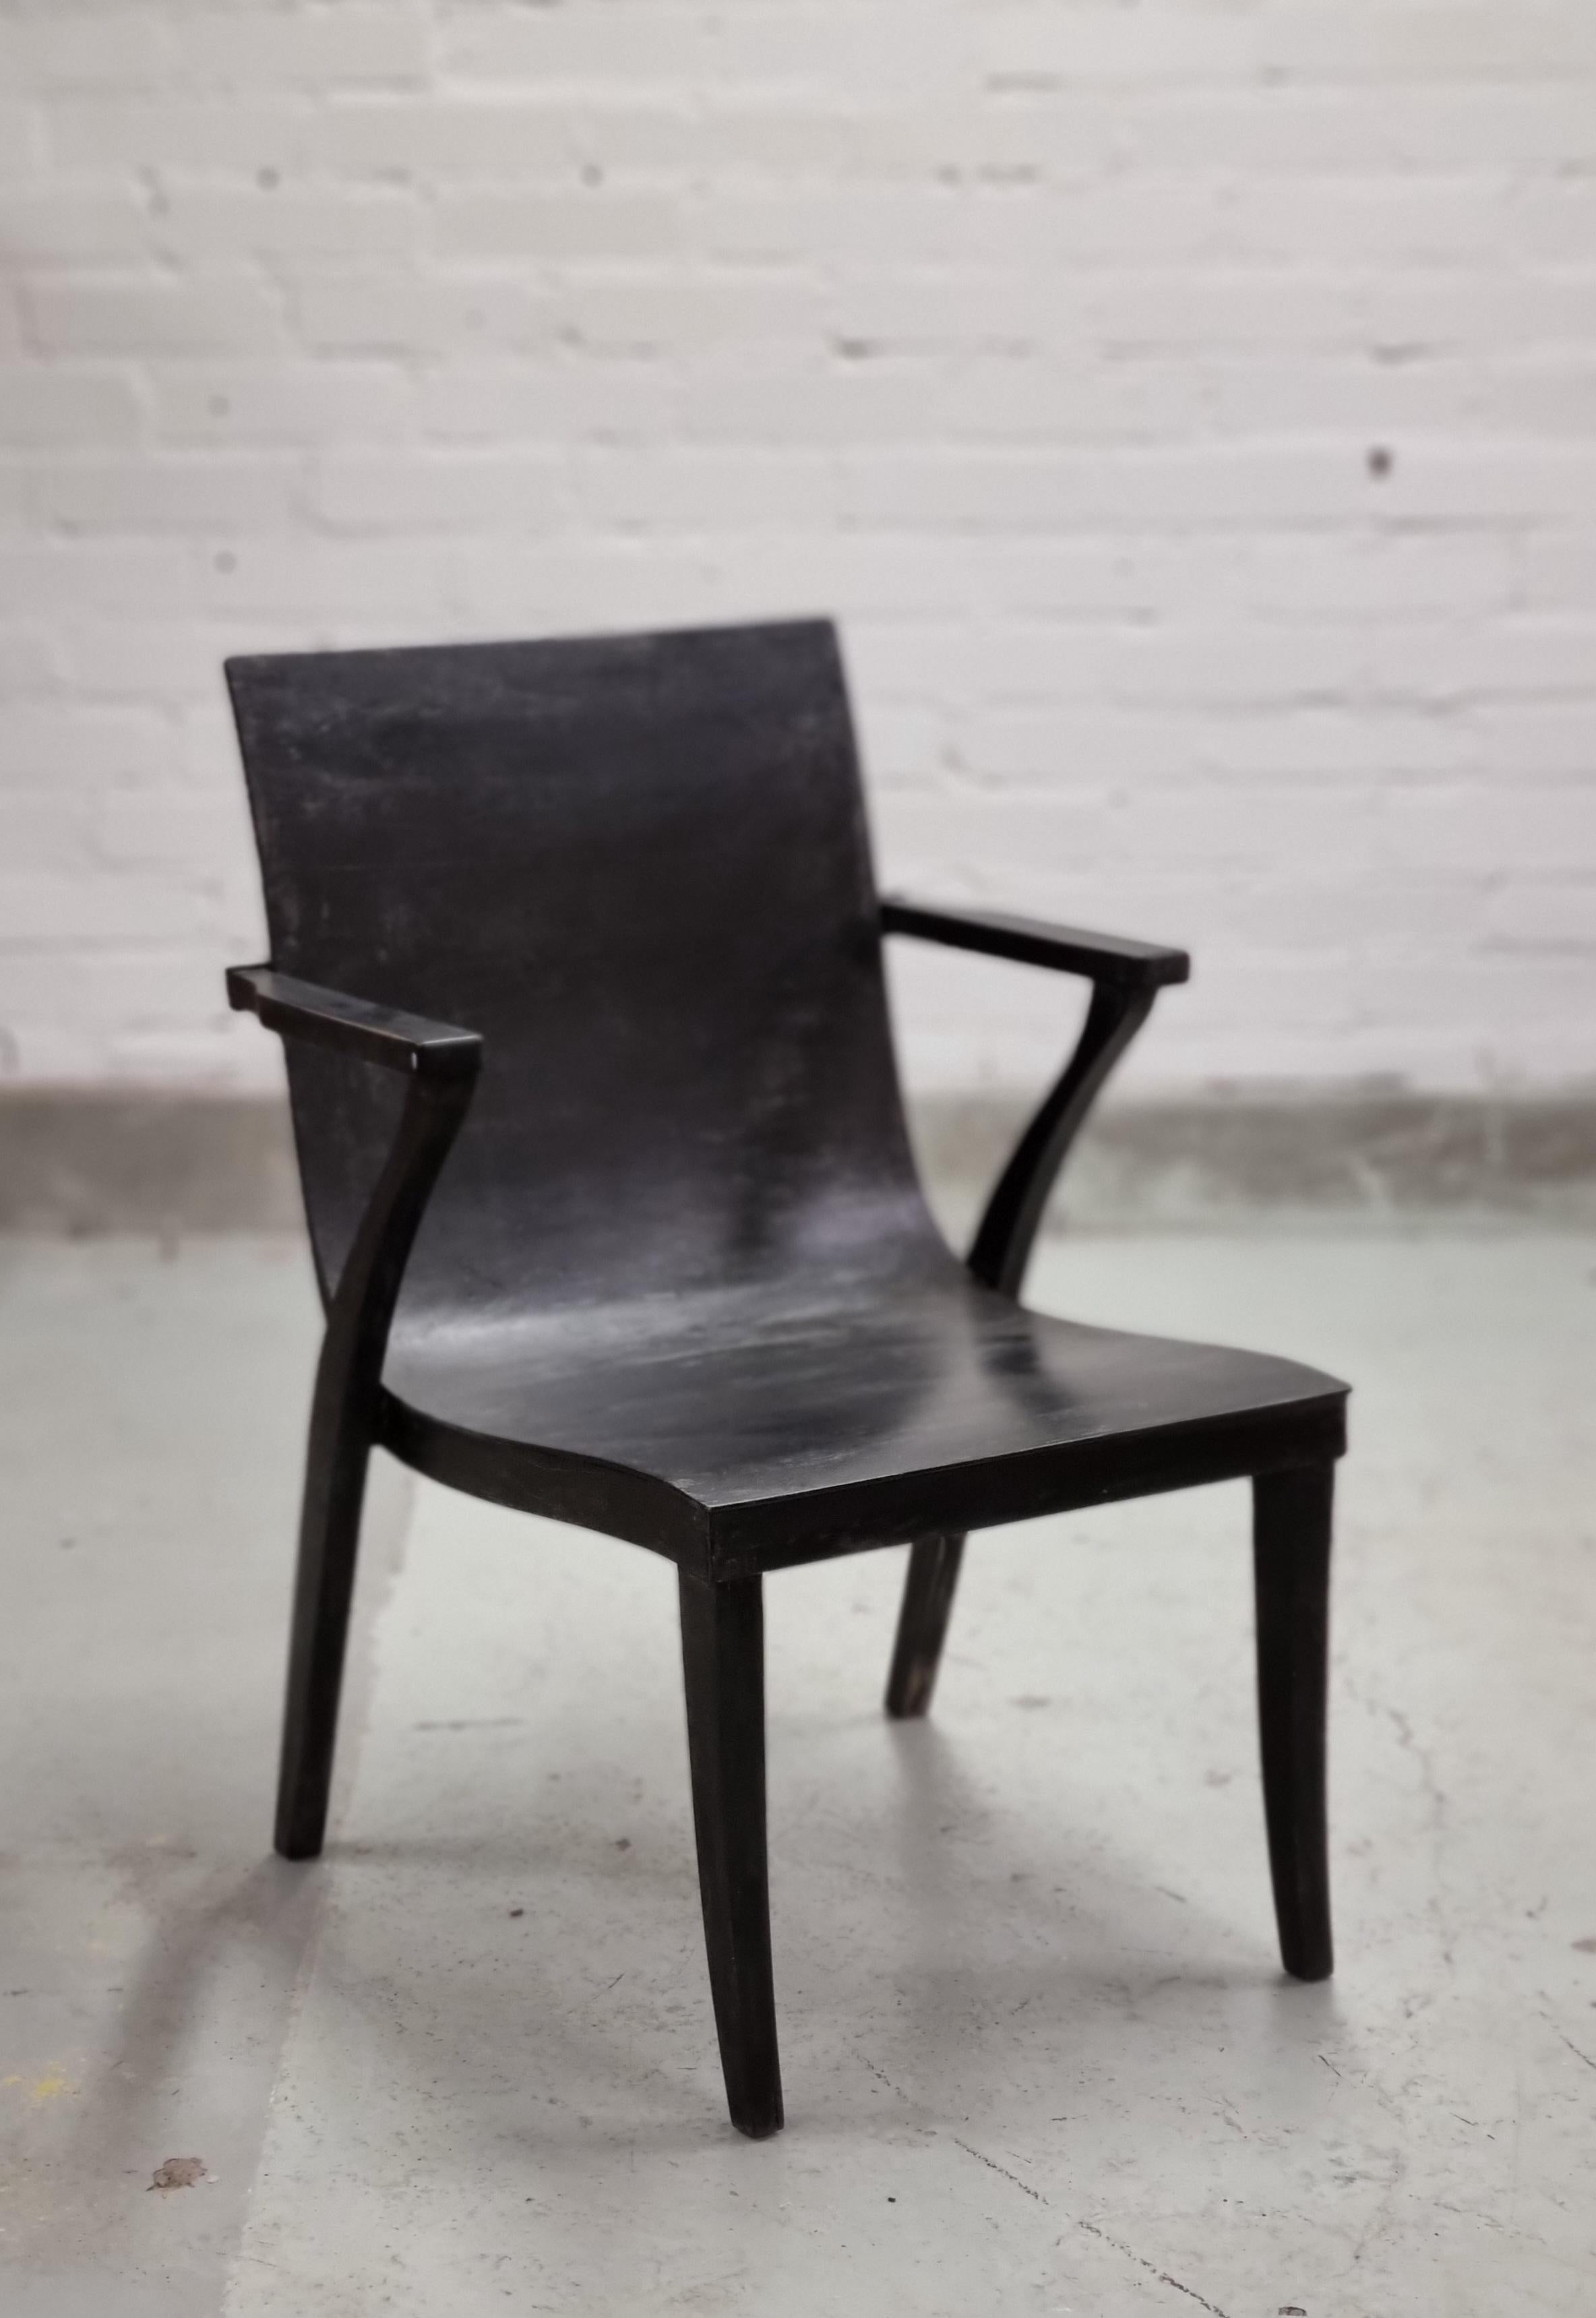 This extremely rare solid birch and bent birch plywood armchair was designed by Finnish architect Alvar Aalto and Otto Korhonen, who was one of the best known Finnish cabinetmakers and factory owners.  Otto founded Huonekalu- ja Rakennustyötehdas